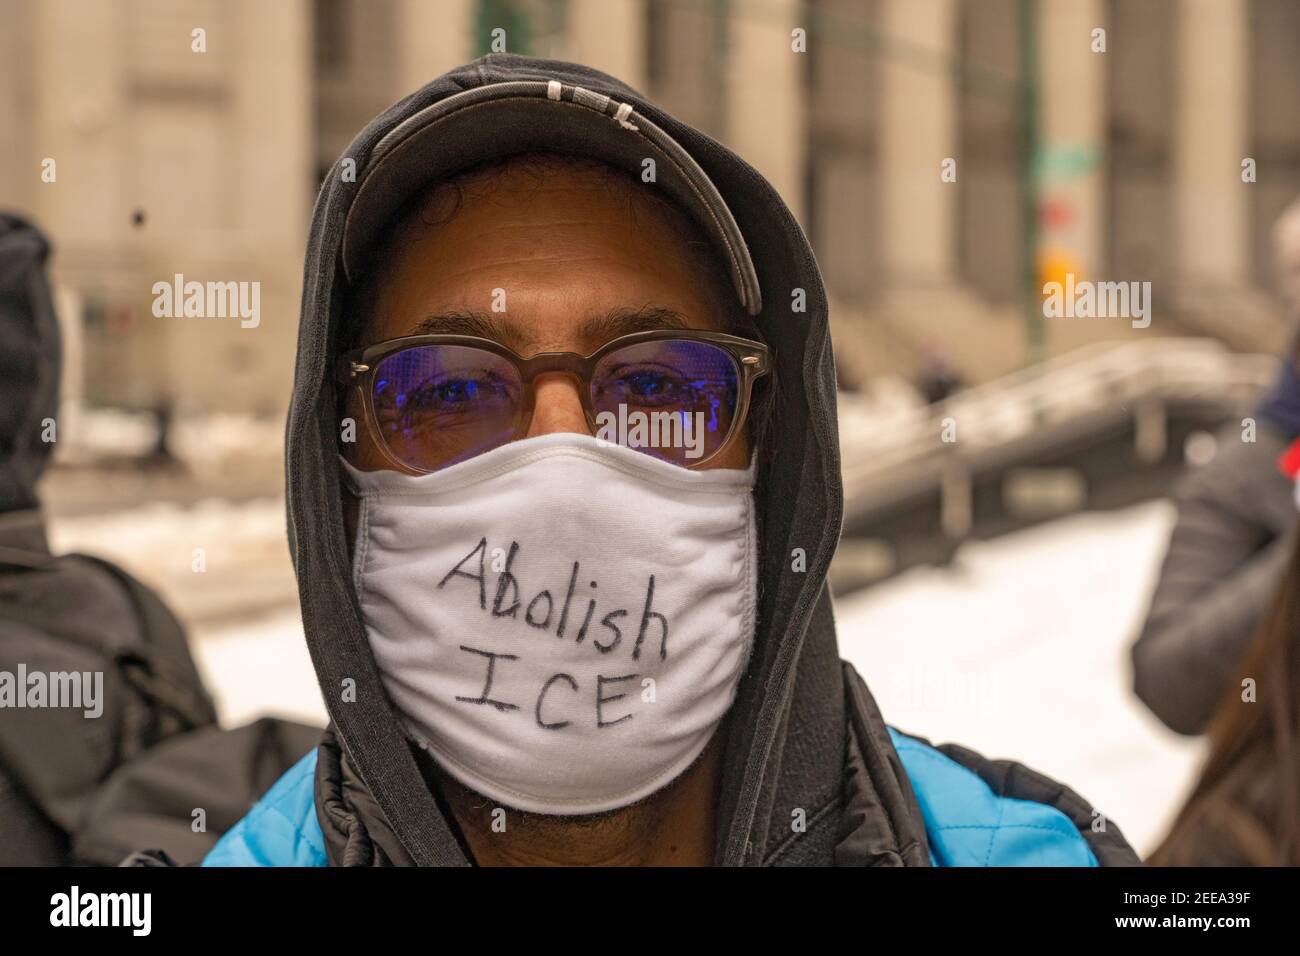 NEW YORK, NY - FEBRUARY 15: A protester ware an Abolish ICE face mask at Foley Square during an Abolish ICE (Immigration and Customs Enforcement) protest on February 15, 2021 in New York City.   Free Them All by Abolish ICE Coalition marched for Javier Castillo Maradiaga through downtown New York City. Mr. Maradiaga, a 27-year-old Bronx man who has lived in the U.S. since he was 7 years old was set to be deported by the U.S. Immigration and Customs Enforcement (ICE). Stock Photo